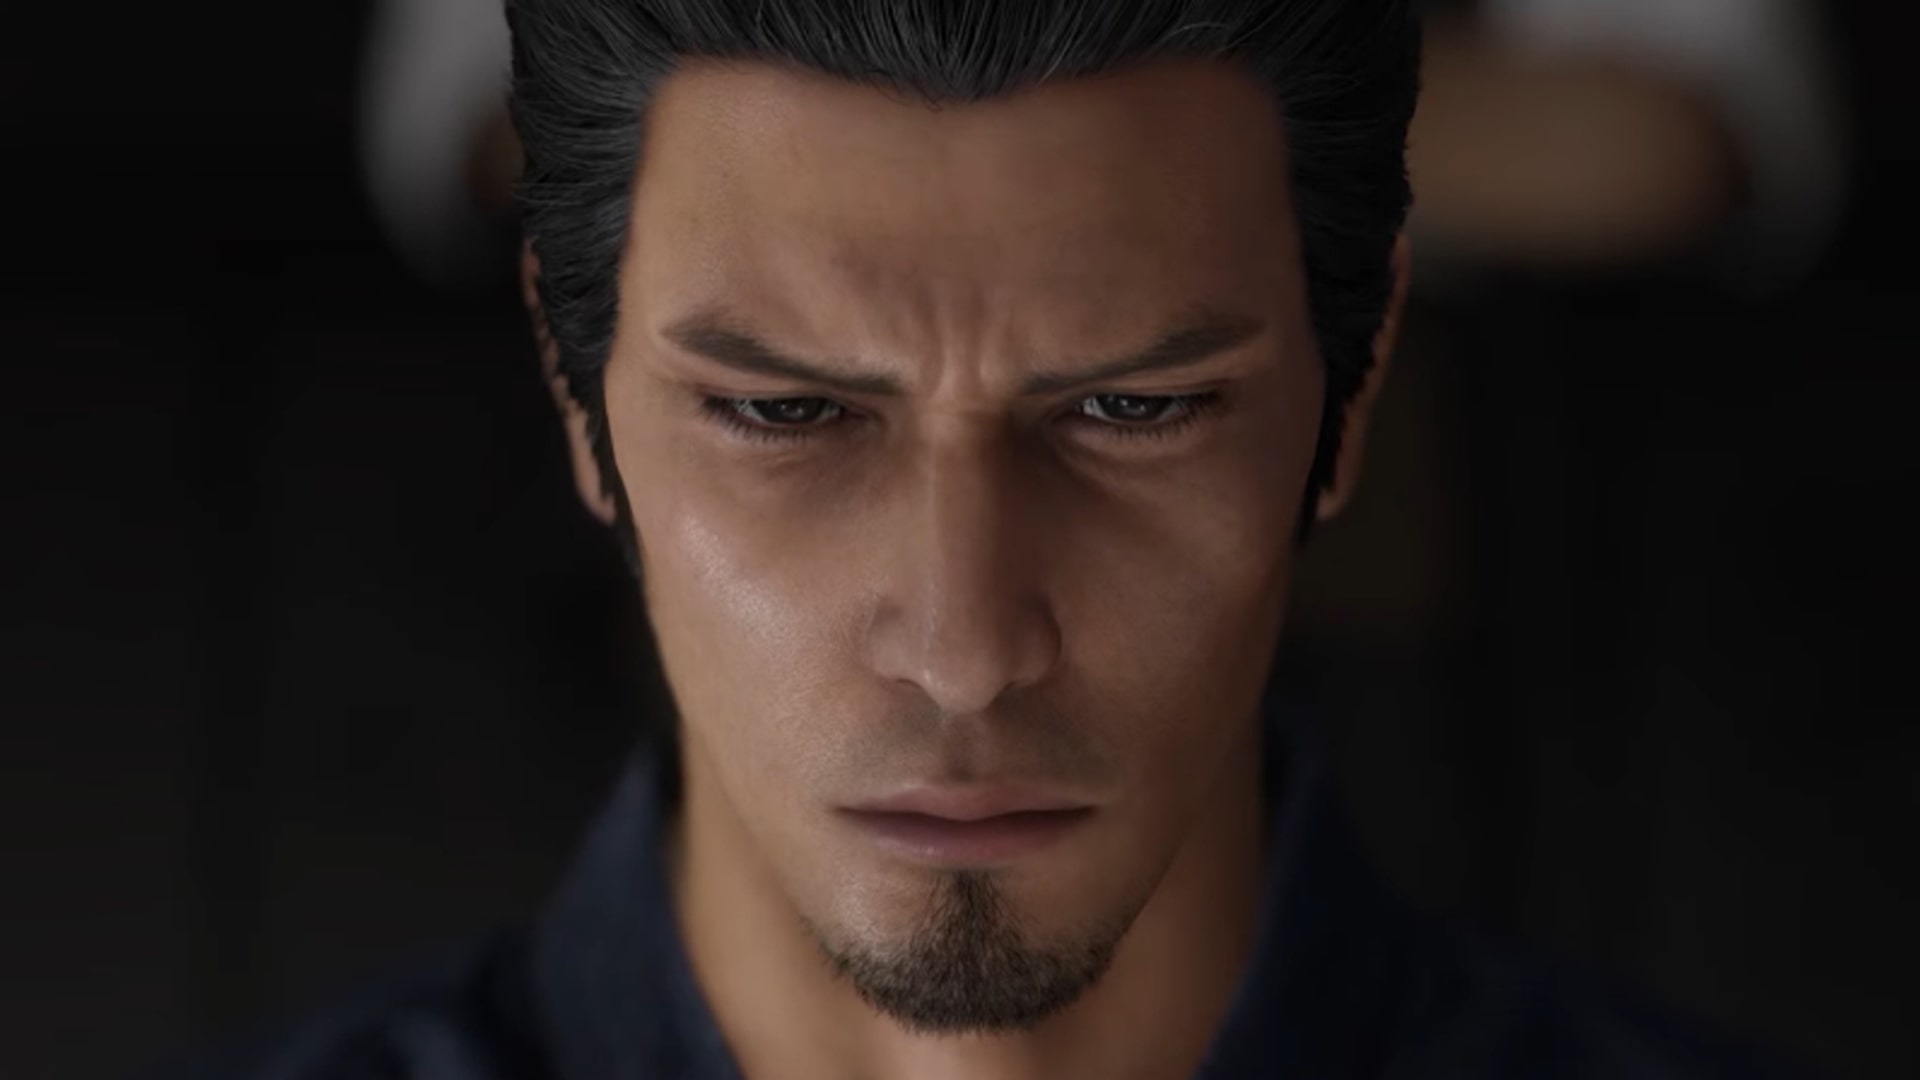 An image showing Kazuma Kiryu, the protagonist of the Yakuza game series, in his return to the game franchise, as announced in the latest Yakuza game news.